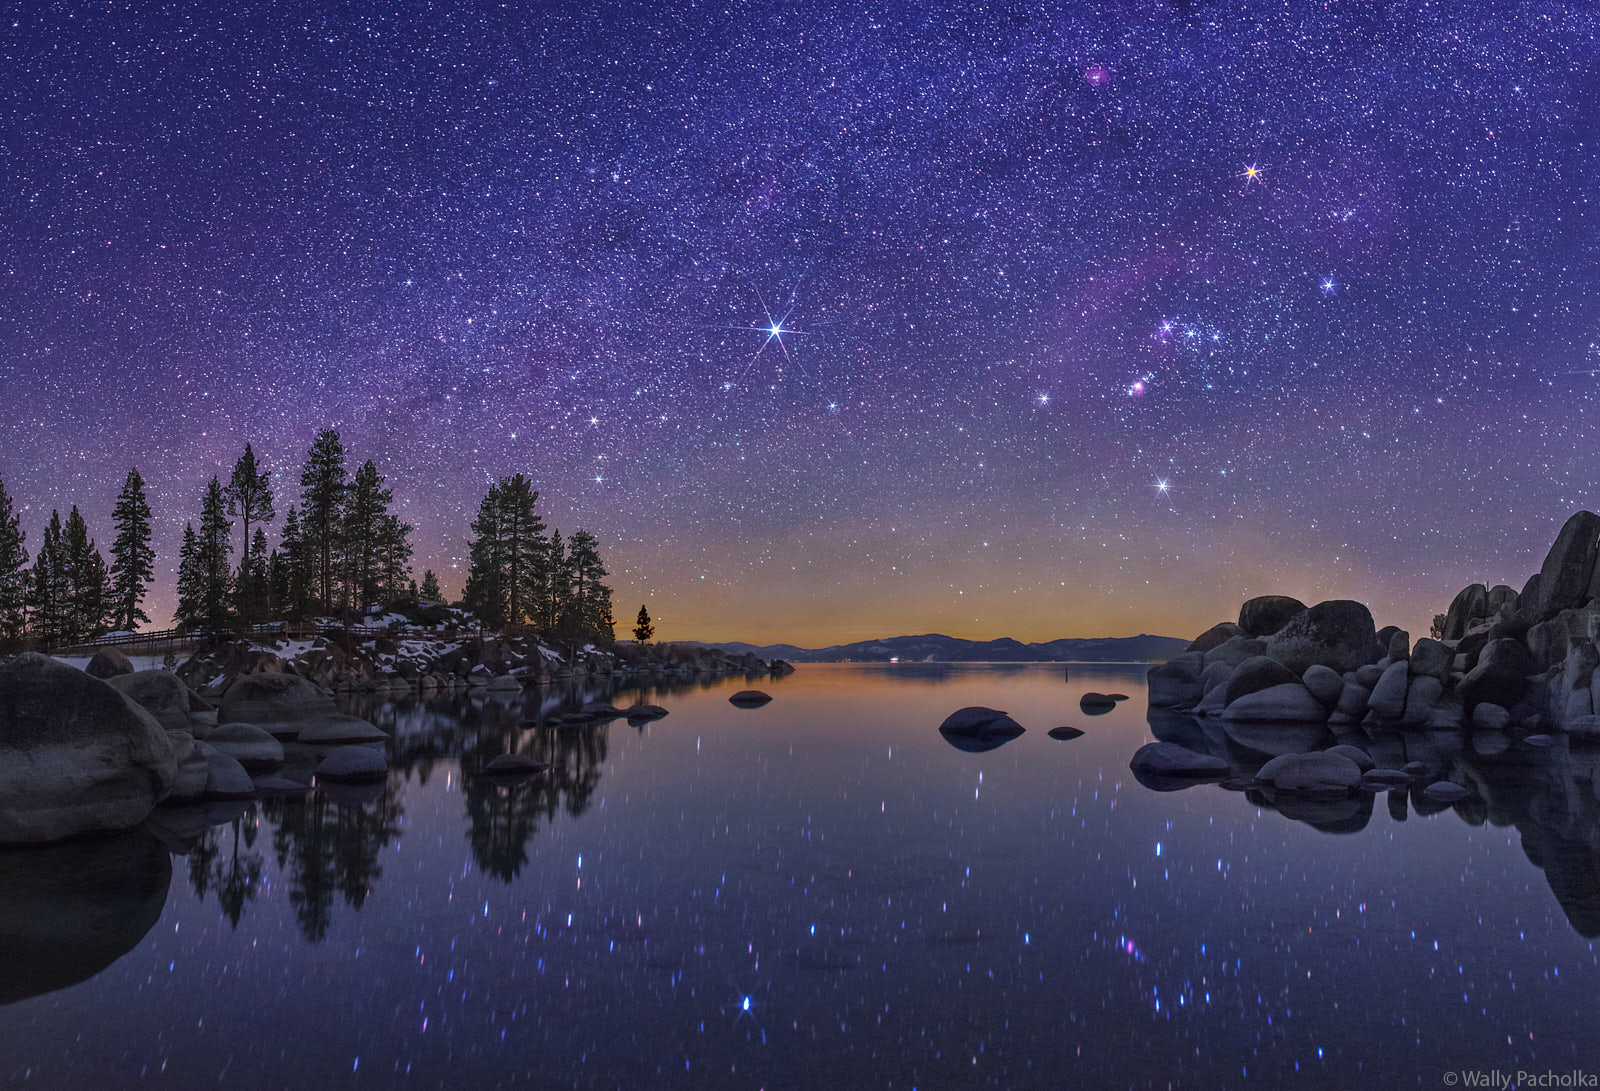 The winter constellations grow brightly over the serene Sand Harbor in Lake Tahoe.